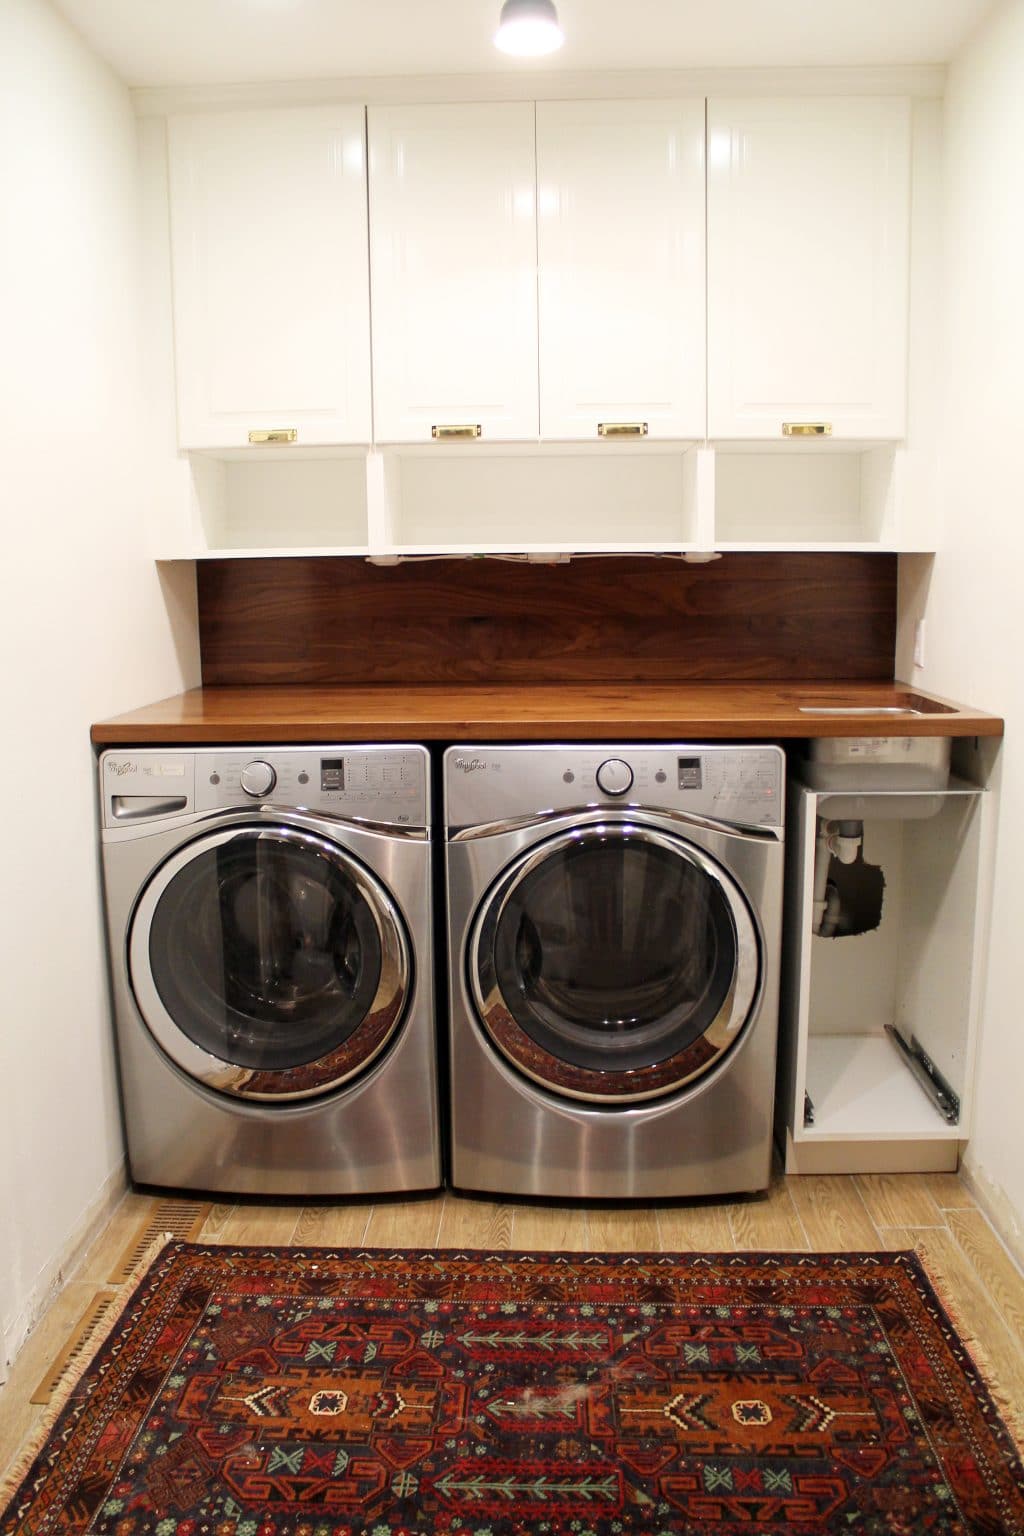 A Walnut Counter And Backsplash in the Laundry Room - Chris Loves Julia